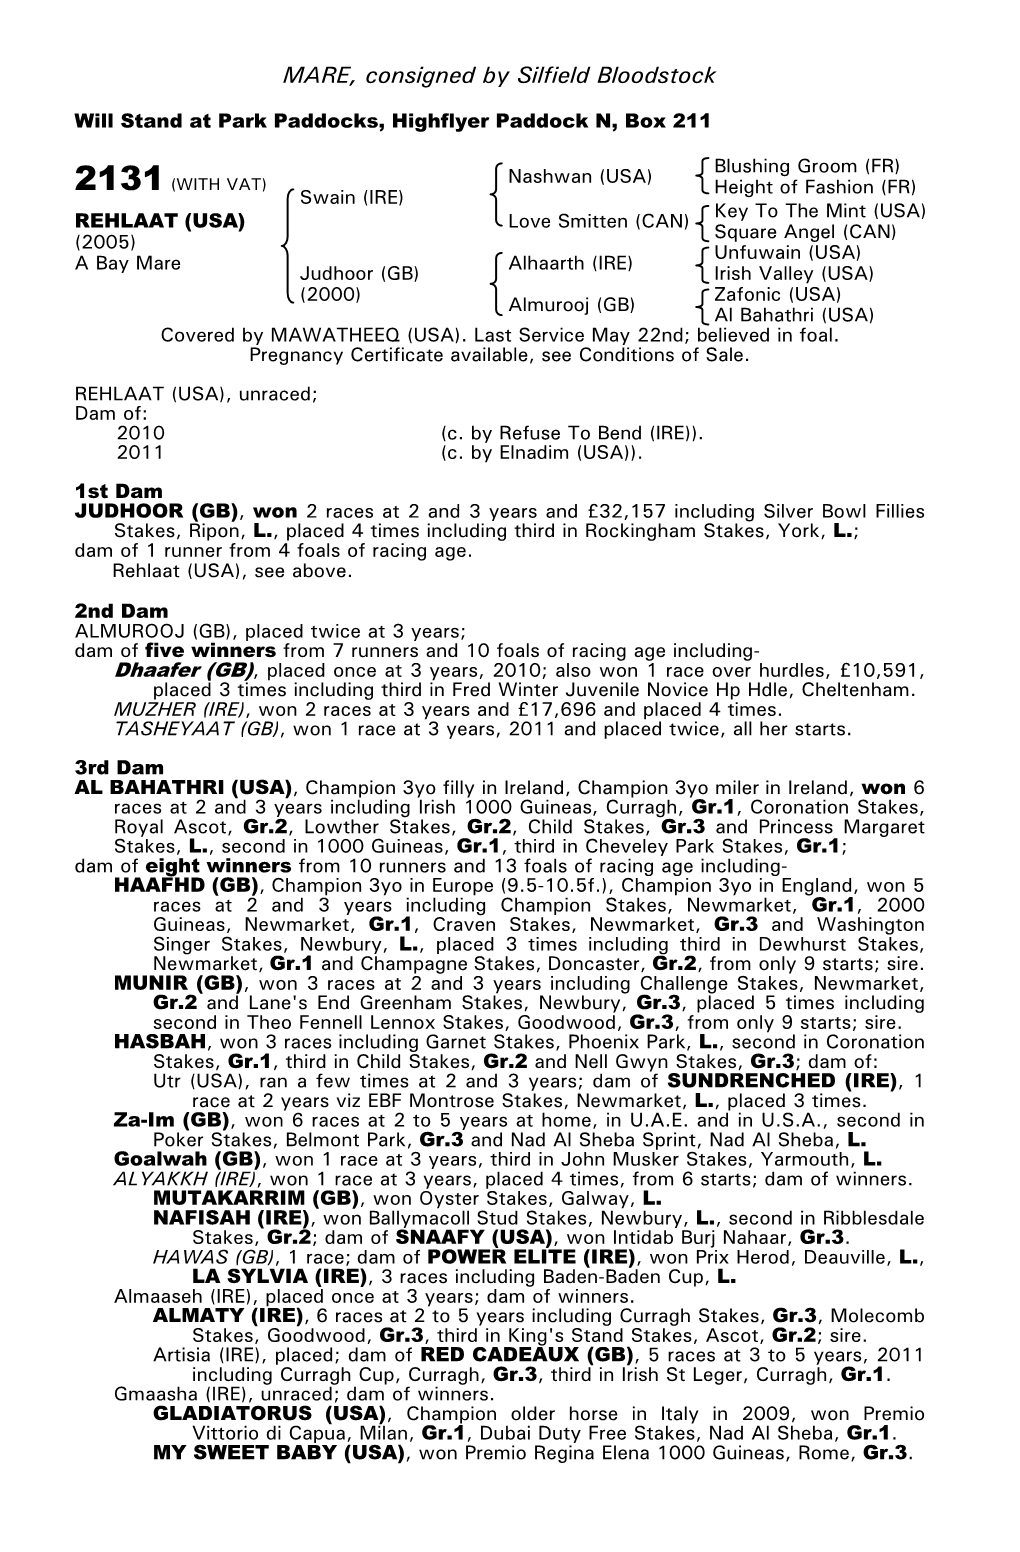 MARE, Consigned by Silfield Bloodstock